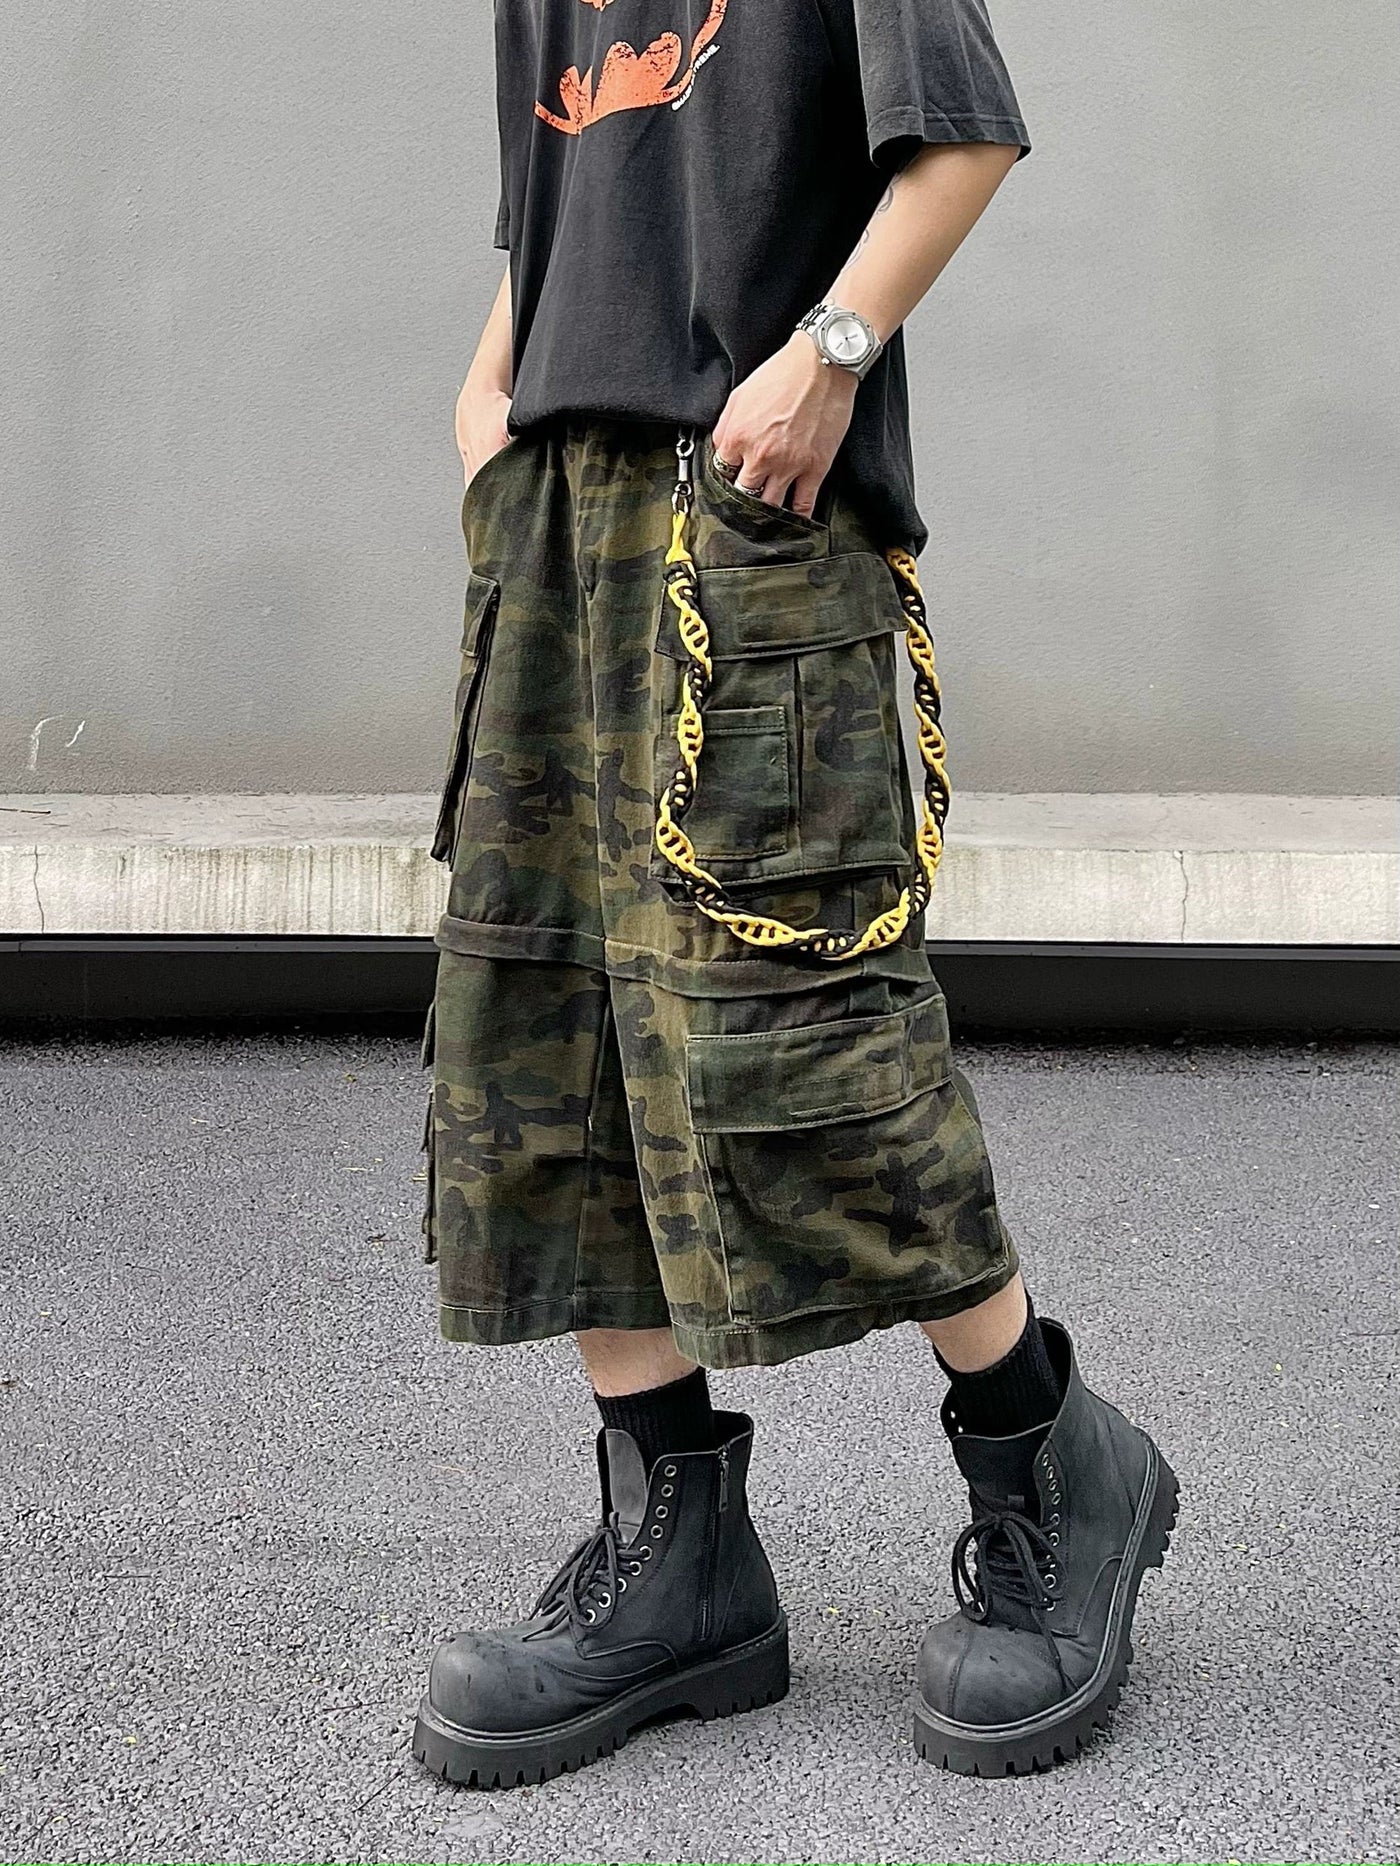 Buckled Strap Camo Cargo Shorts Korean Street Fashion Shorts By Blacklists Shop Online at OH Vault